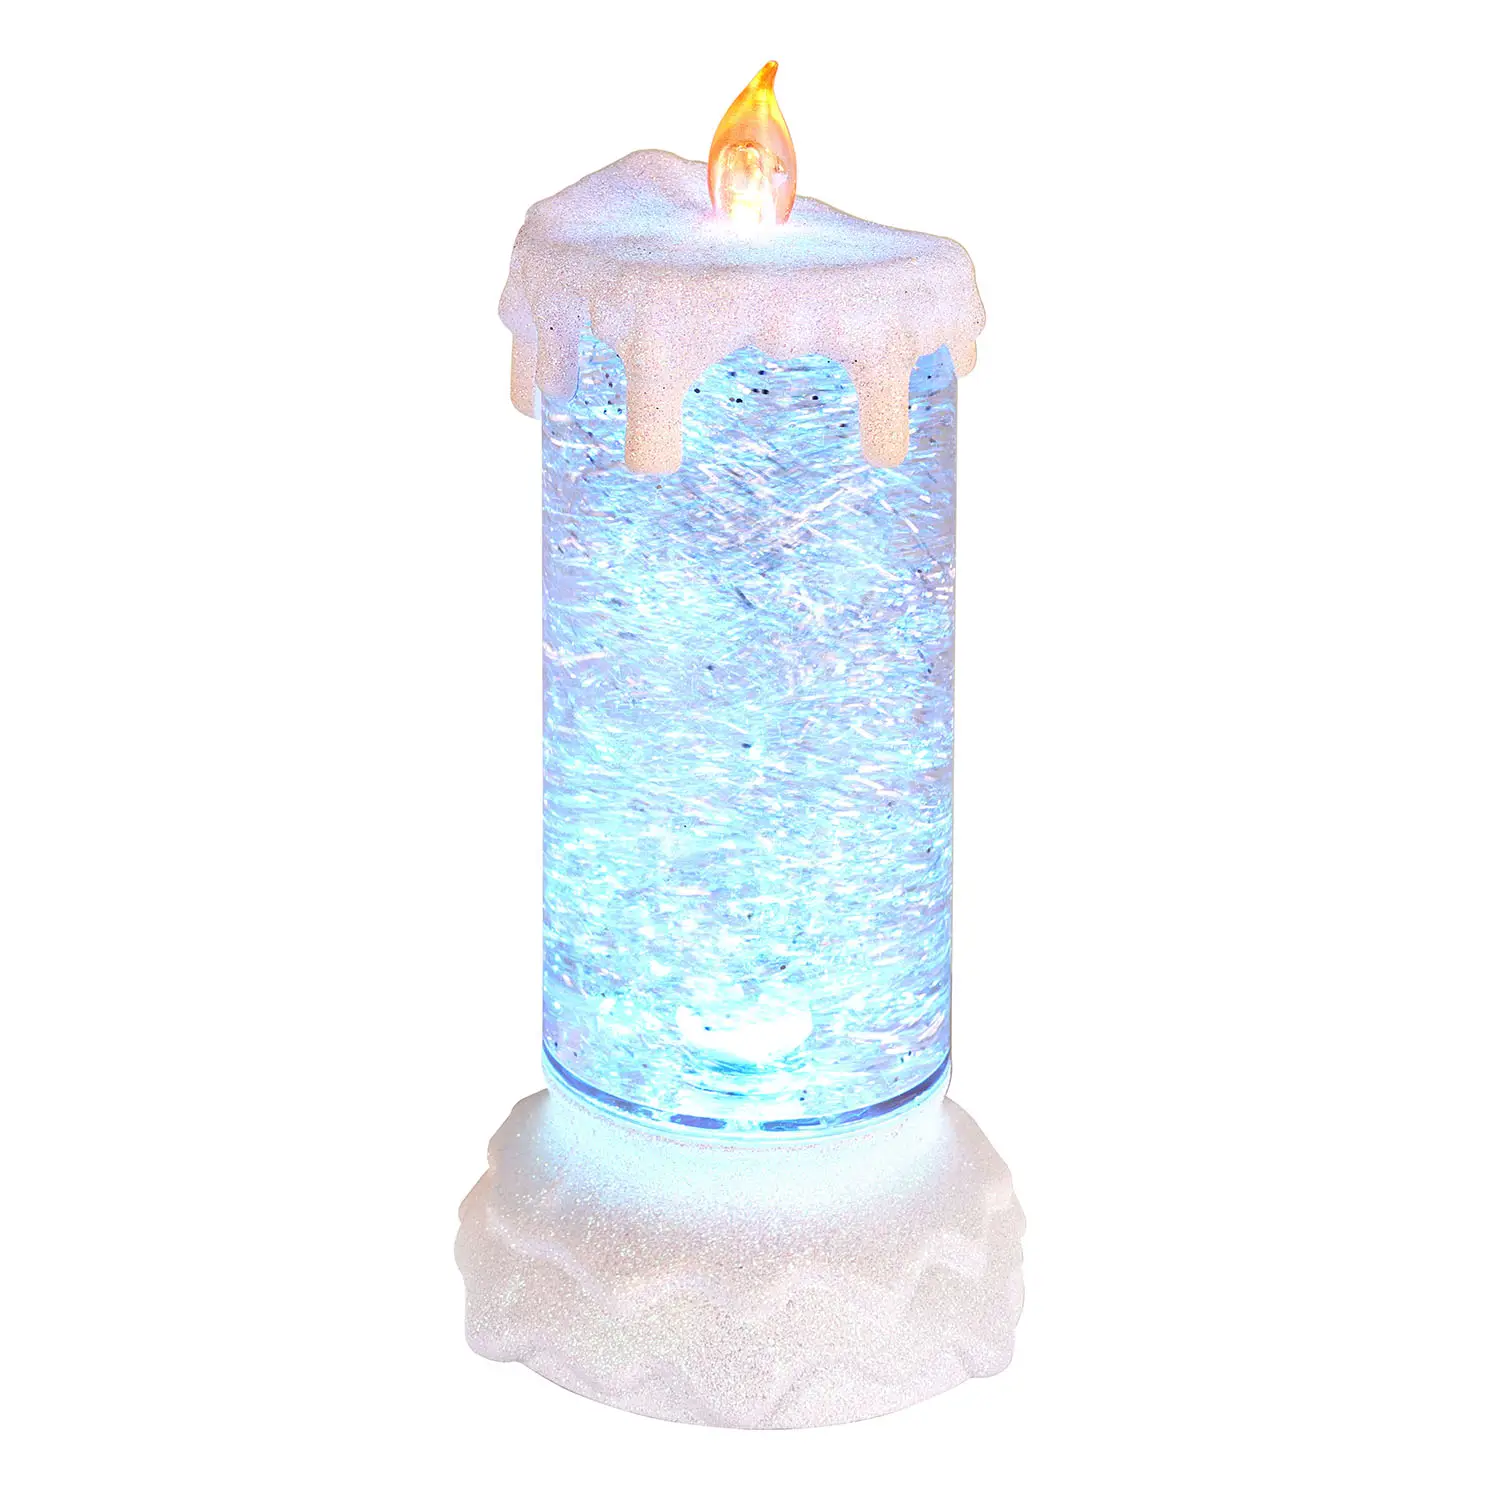 Candle Flameless Candles Battery Operated Flickering Waterproof Flameless Elegant Christmas Led Candle Light